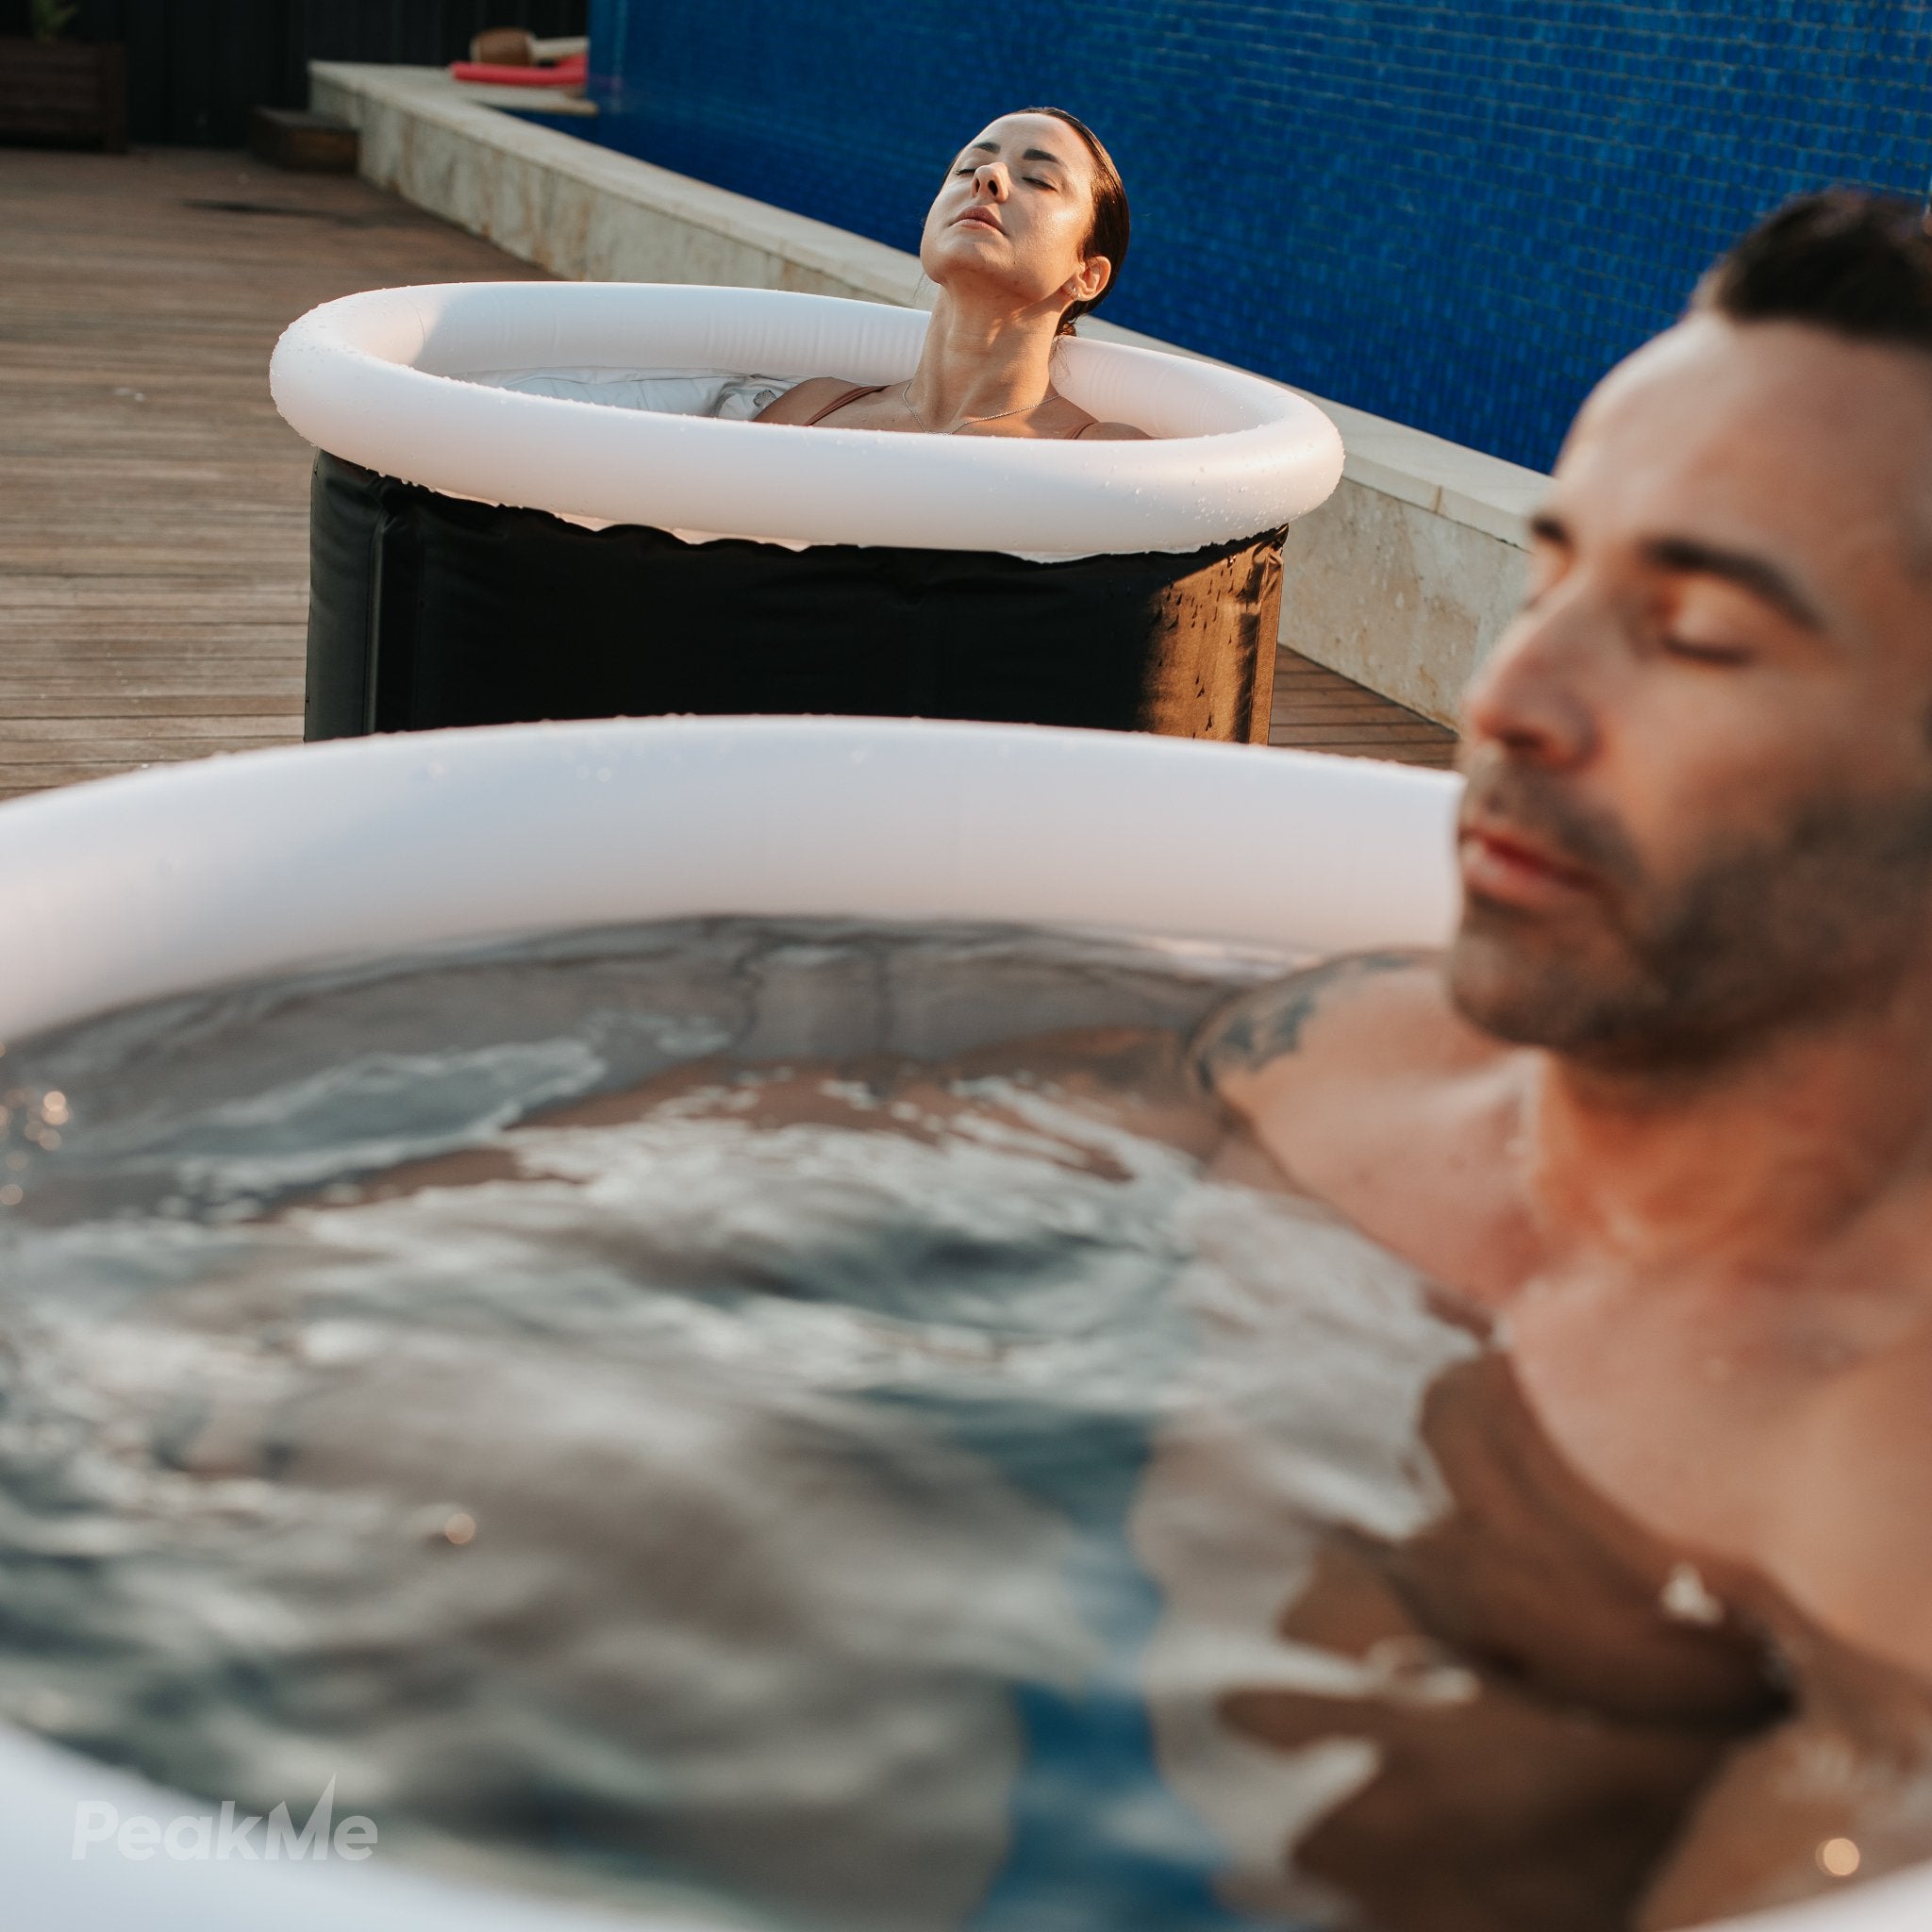 Man and woman in personal PeakMe Focus ice baths relaxing outdoors with the PeakMe logo visible, experiencing the benefits of cold immersion therapy at home.